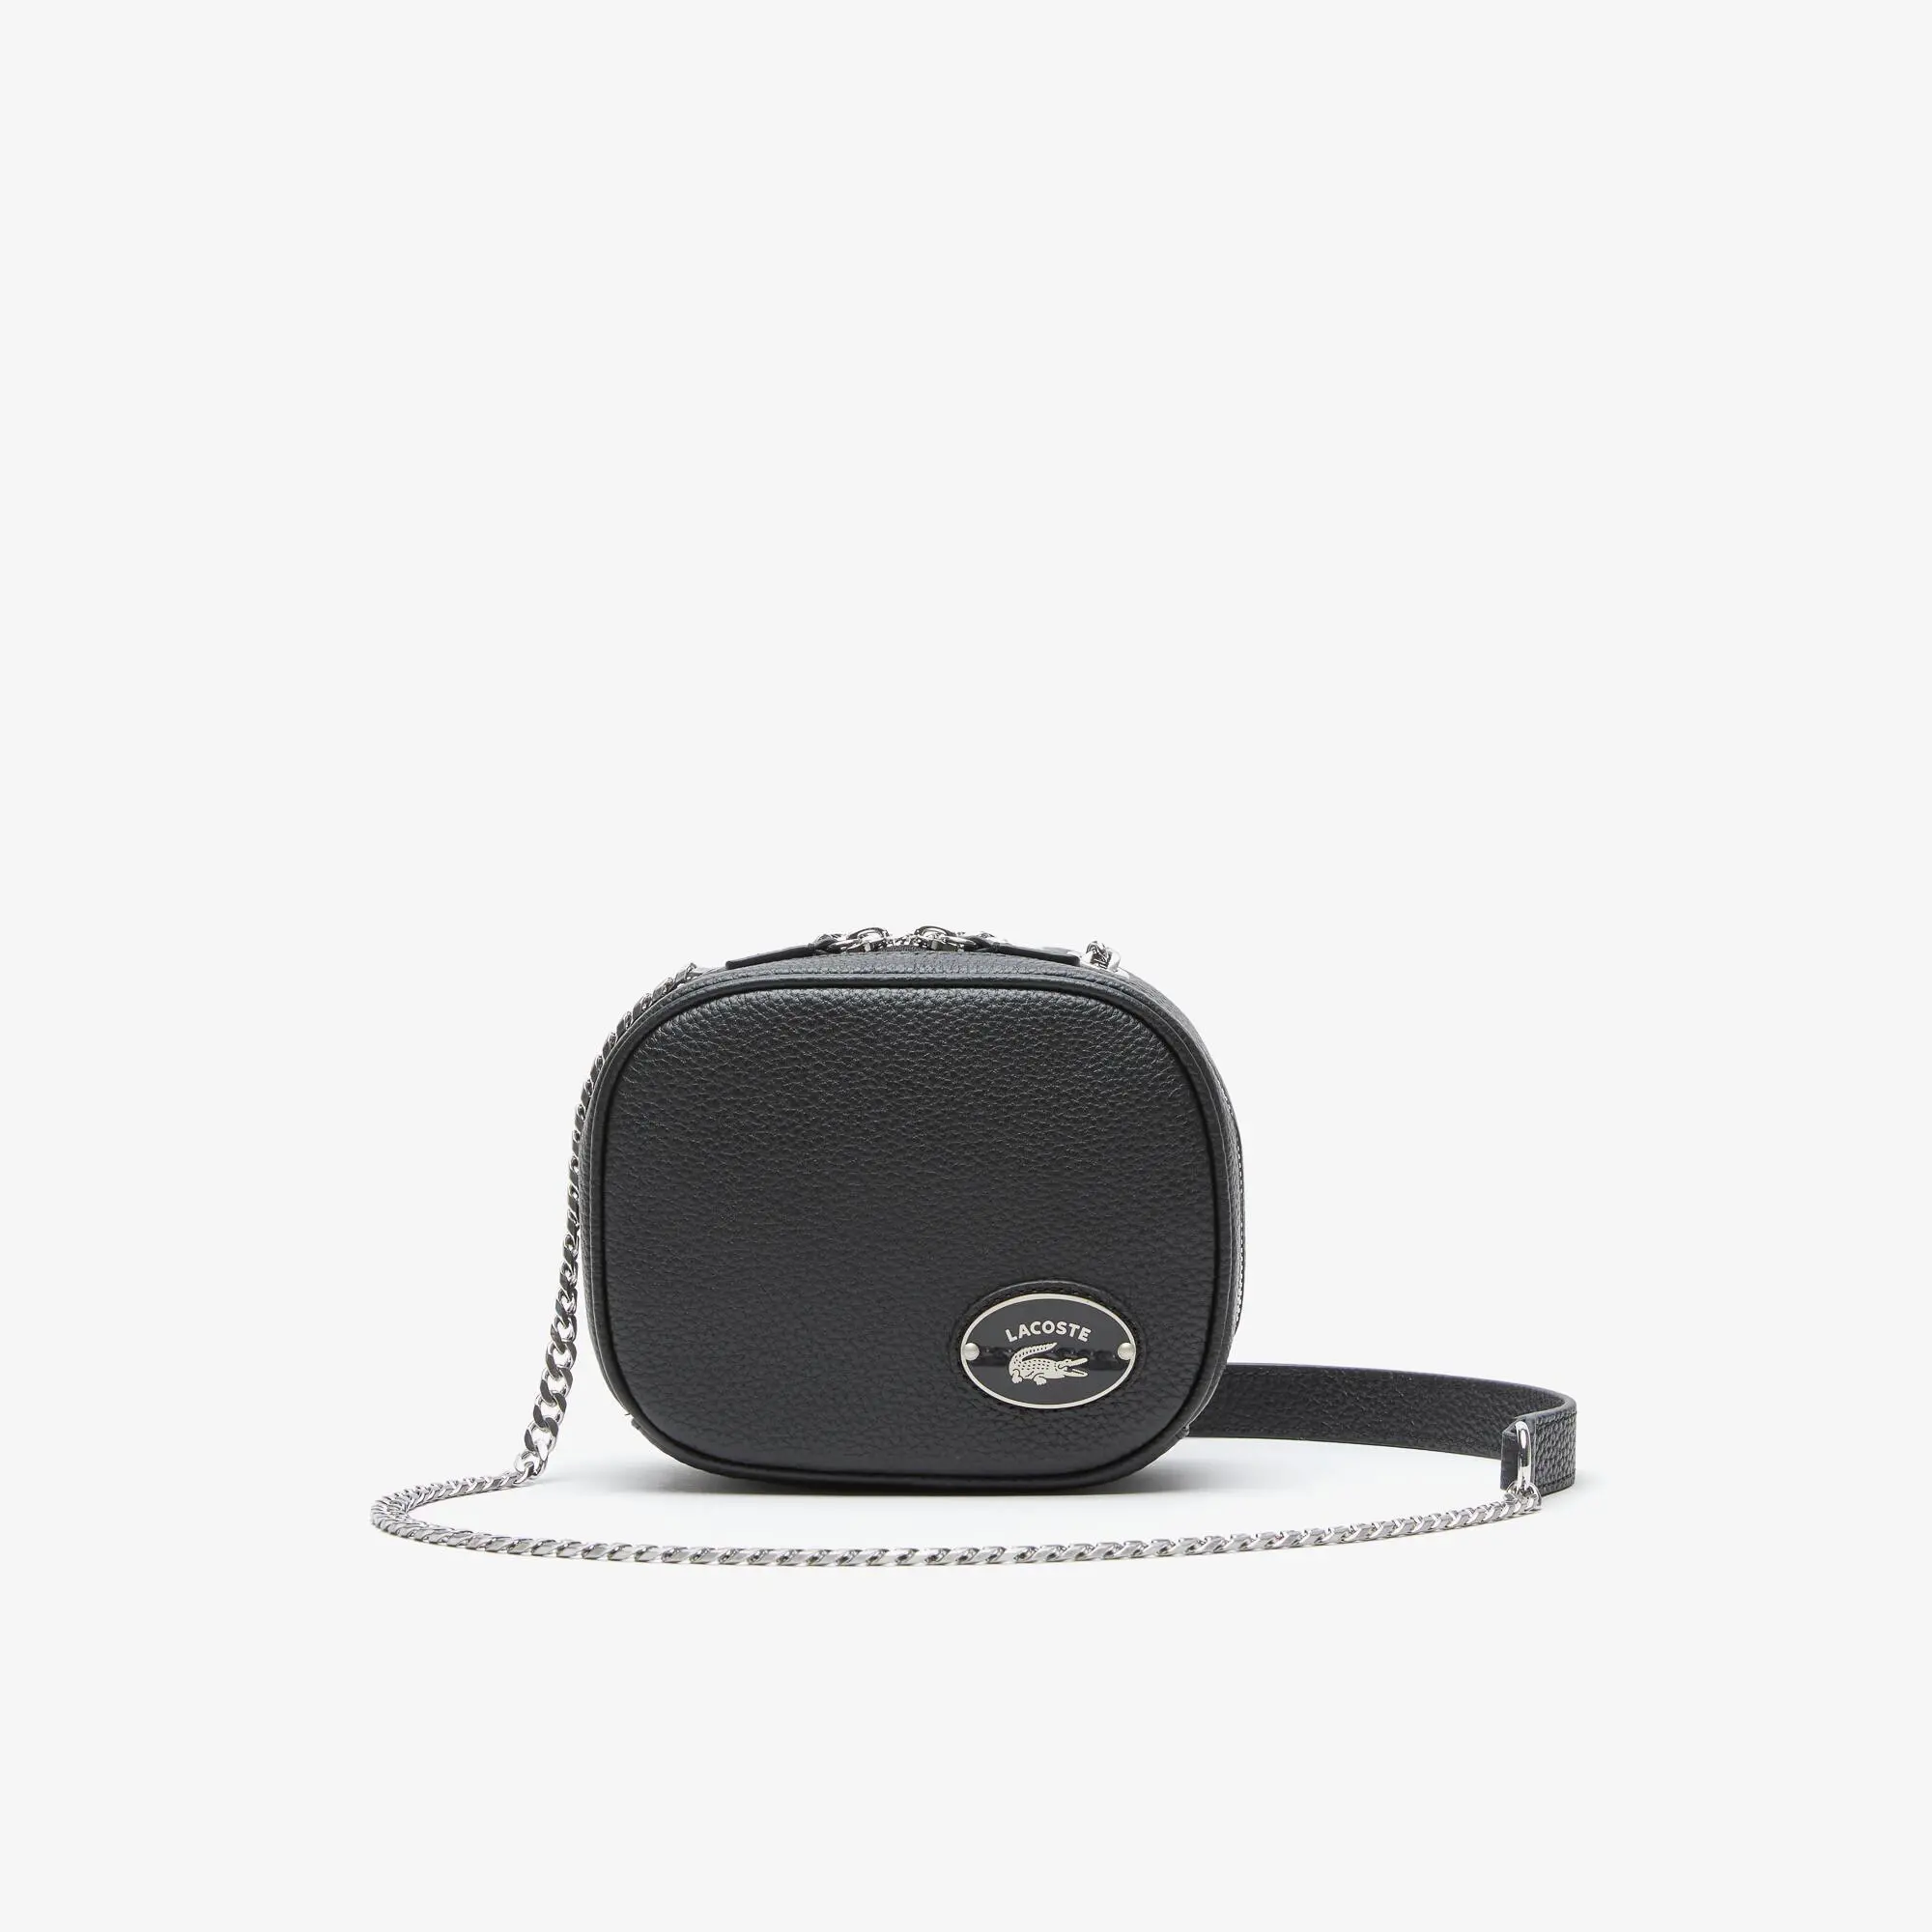 Lacoste Women's Small Grained Leather Crossbody. 1